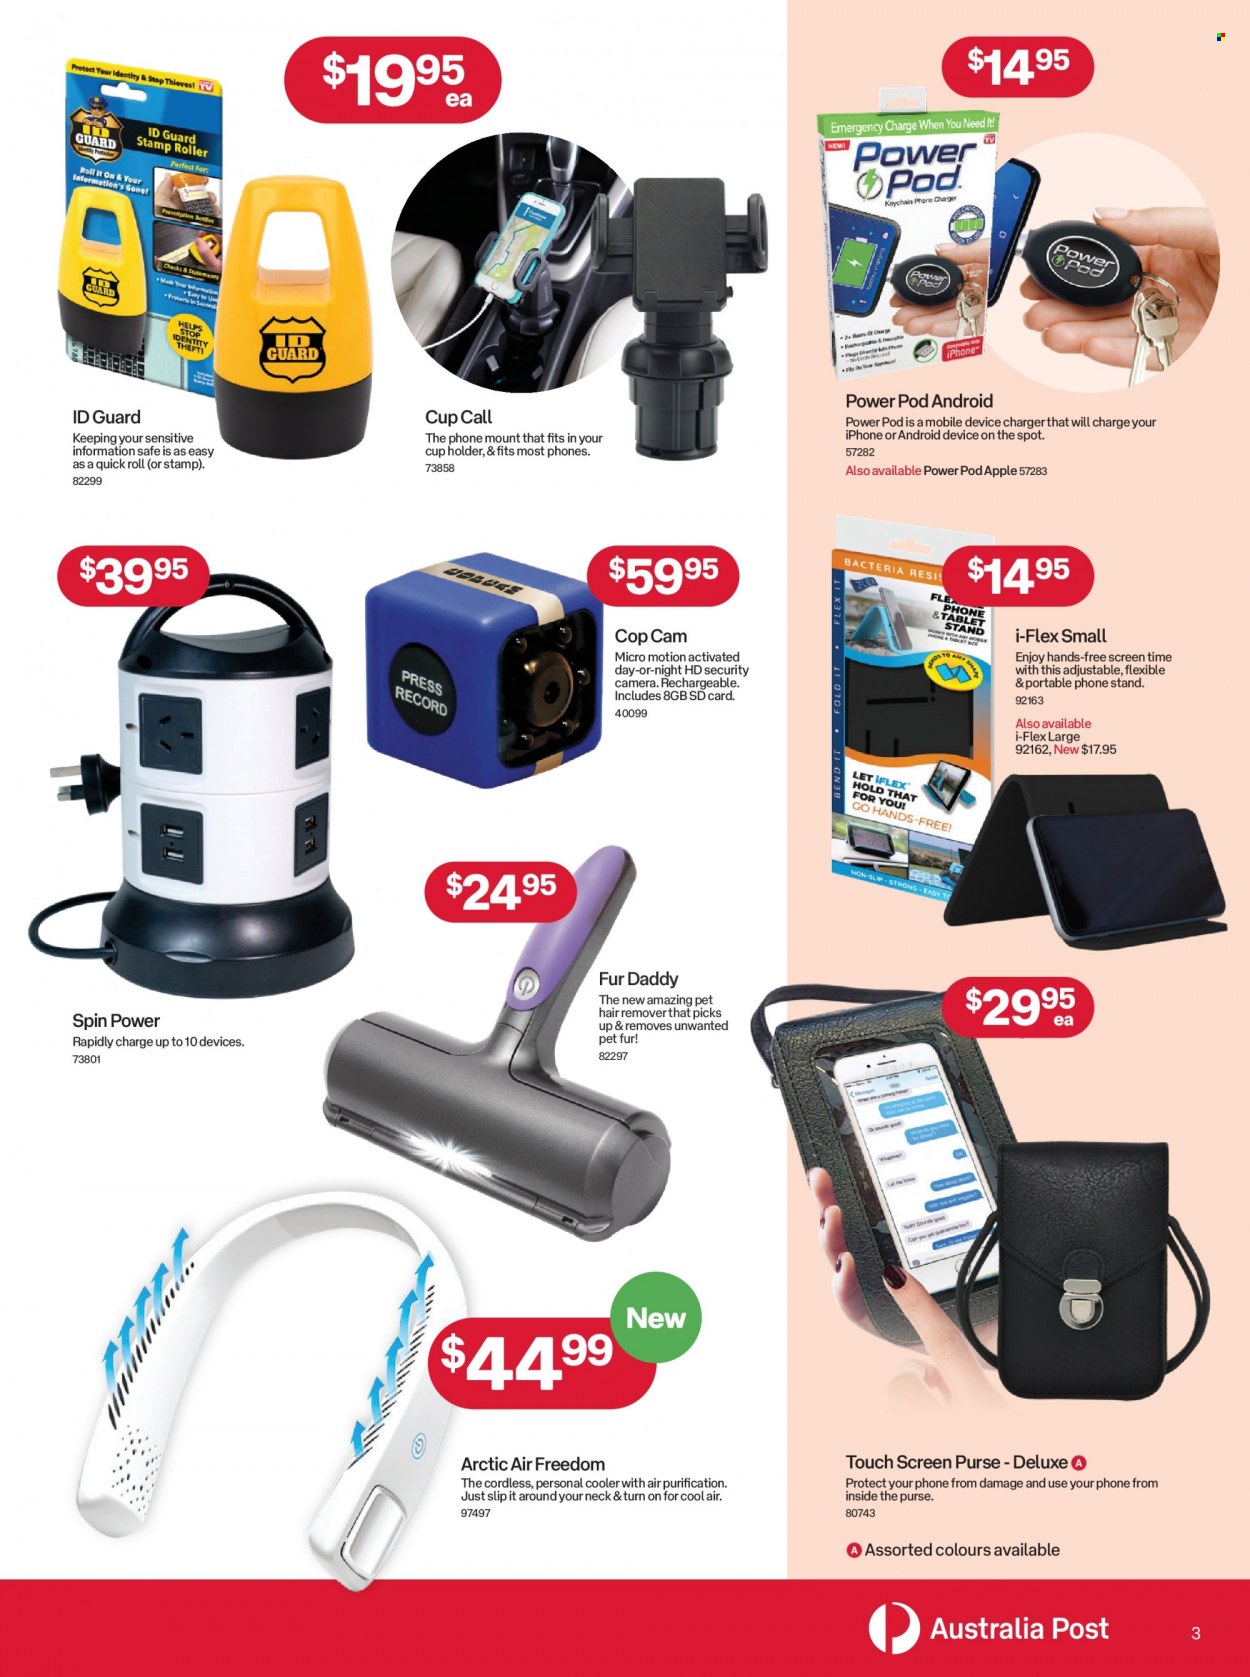 thumbnail - Australia Post Catalogue - 8 Nov 2021 - 28 Nov 2021 - Sales products - Apple, tablet, cup, security camera, iPhone, memory card, mobile phone holder, phone charger, tablet stand, spin power, camera, roller. Page 3.